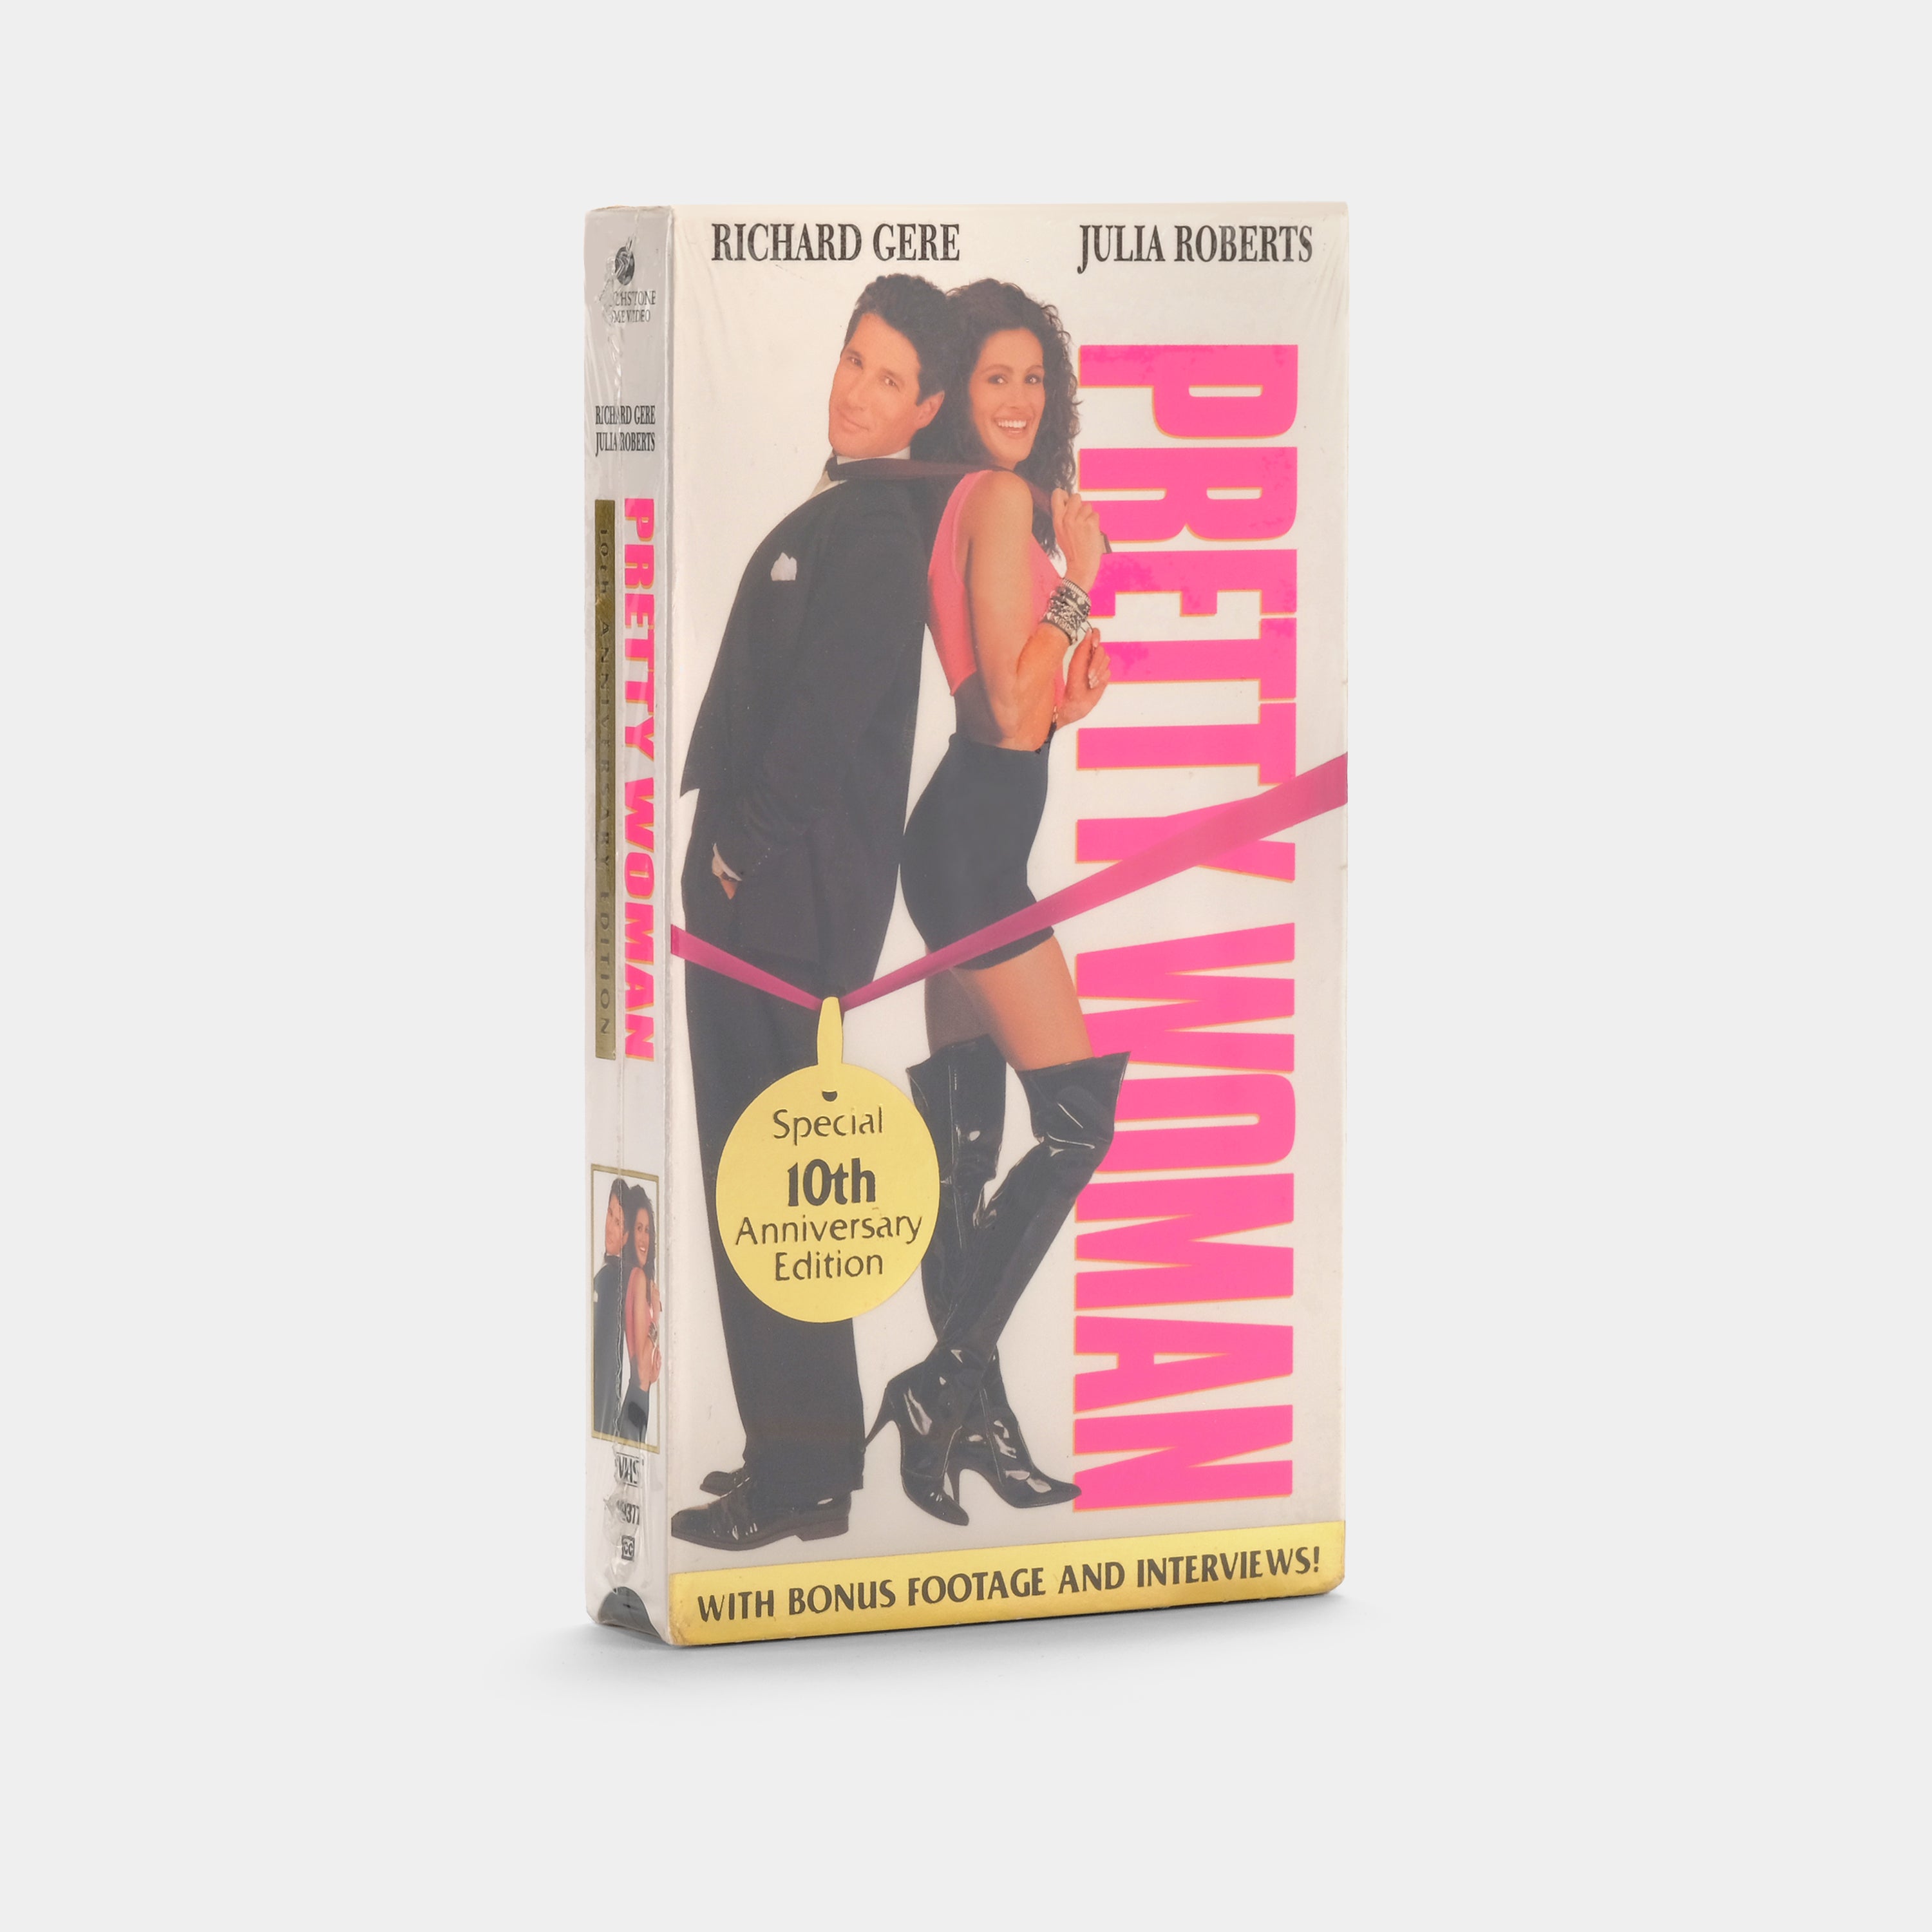 Pretty Woman (Sealed Special 10th Anniversary Edition) VHS Tape